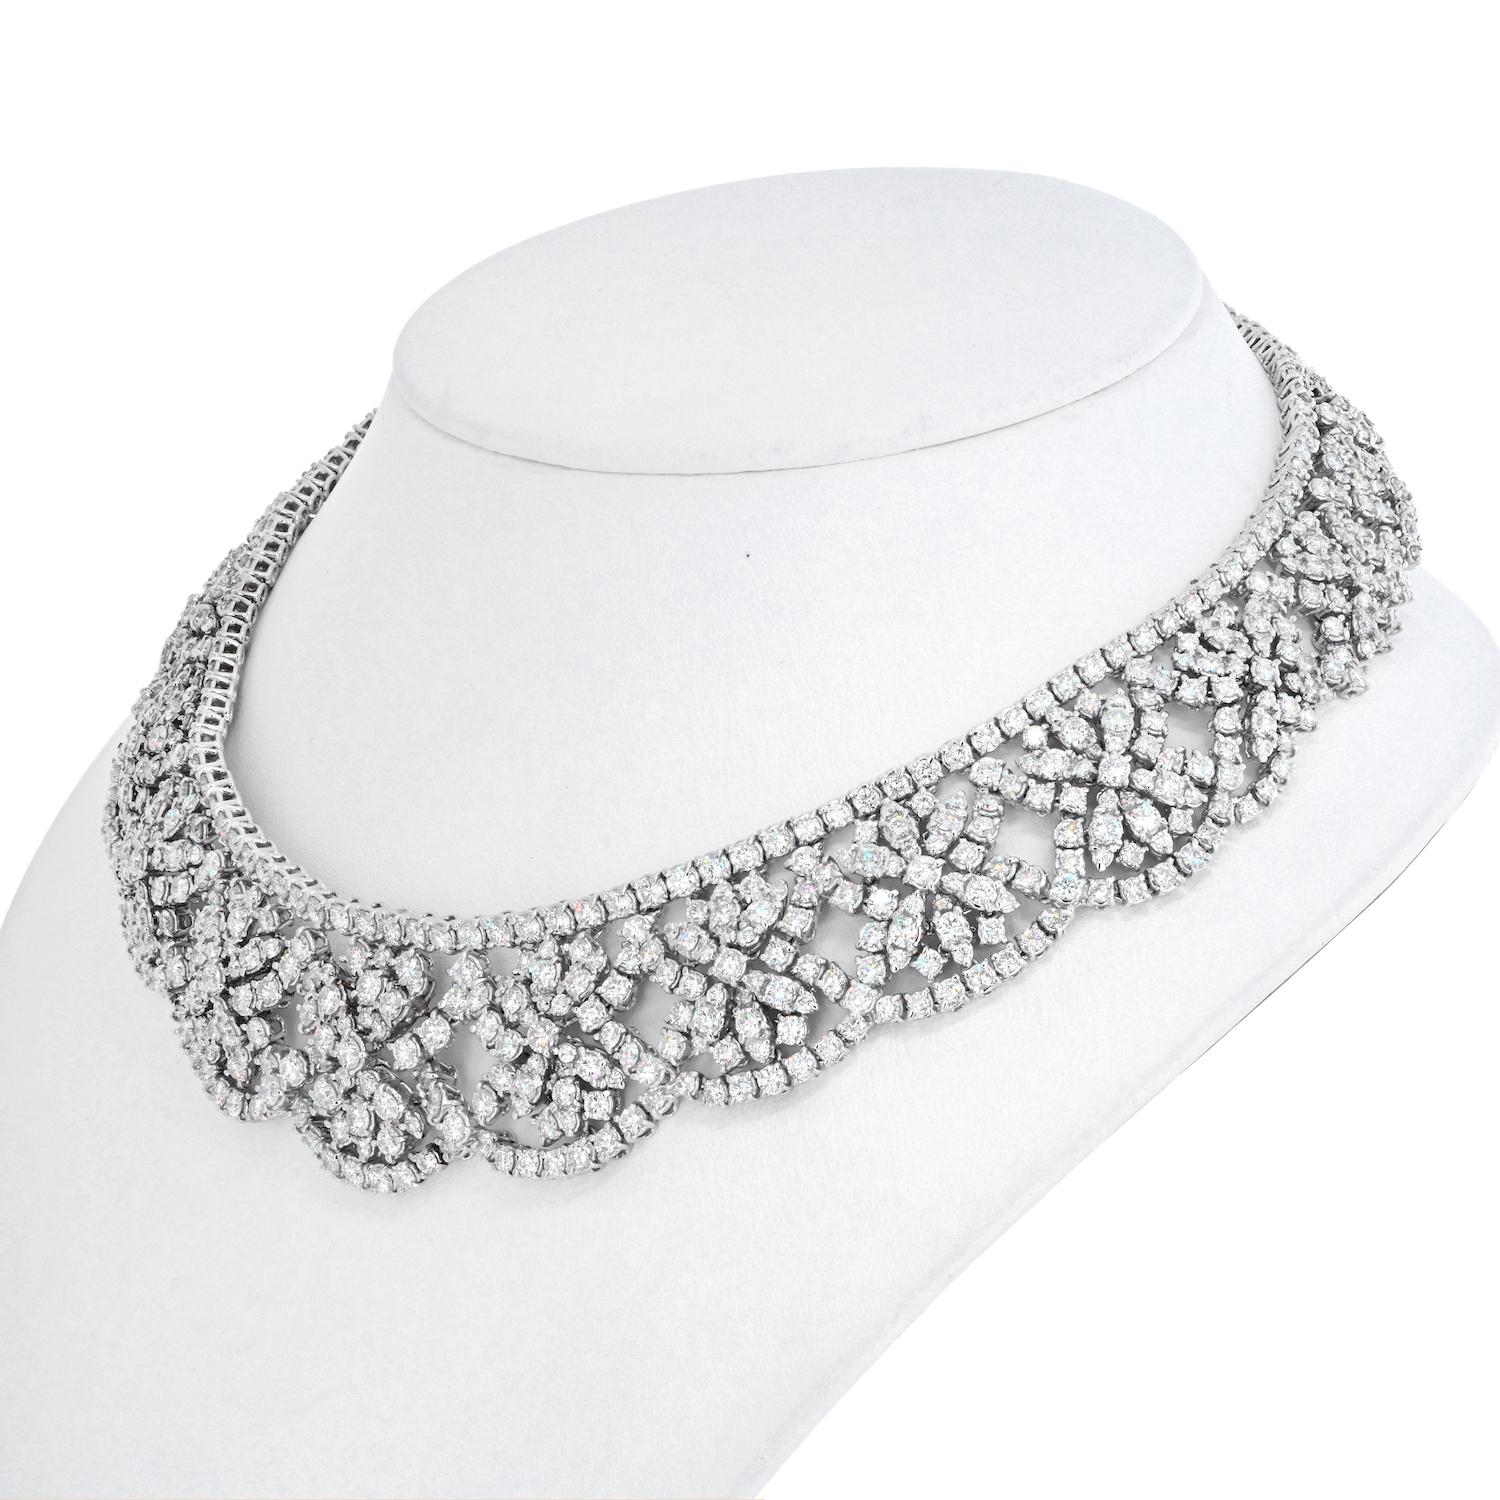 Life only brings us so many special occasions. Weddings, graduations, anniversaries, and maybe a few red carpet events to name the main ones. For those nights you need to look your best: stunning, well put together from head to toe.  
This necklace